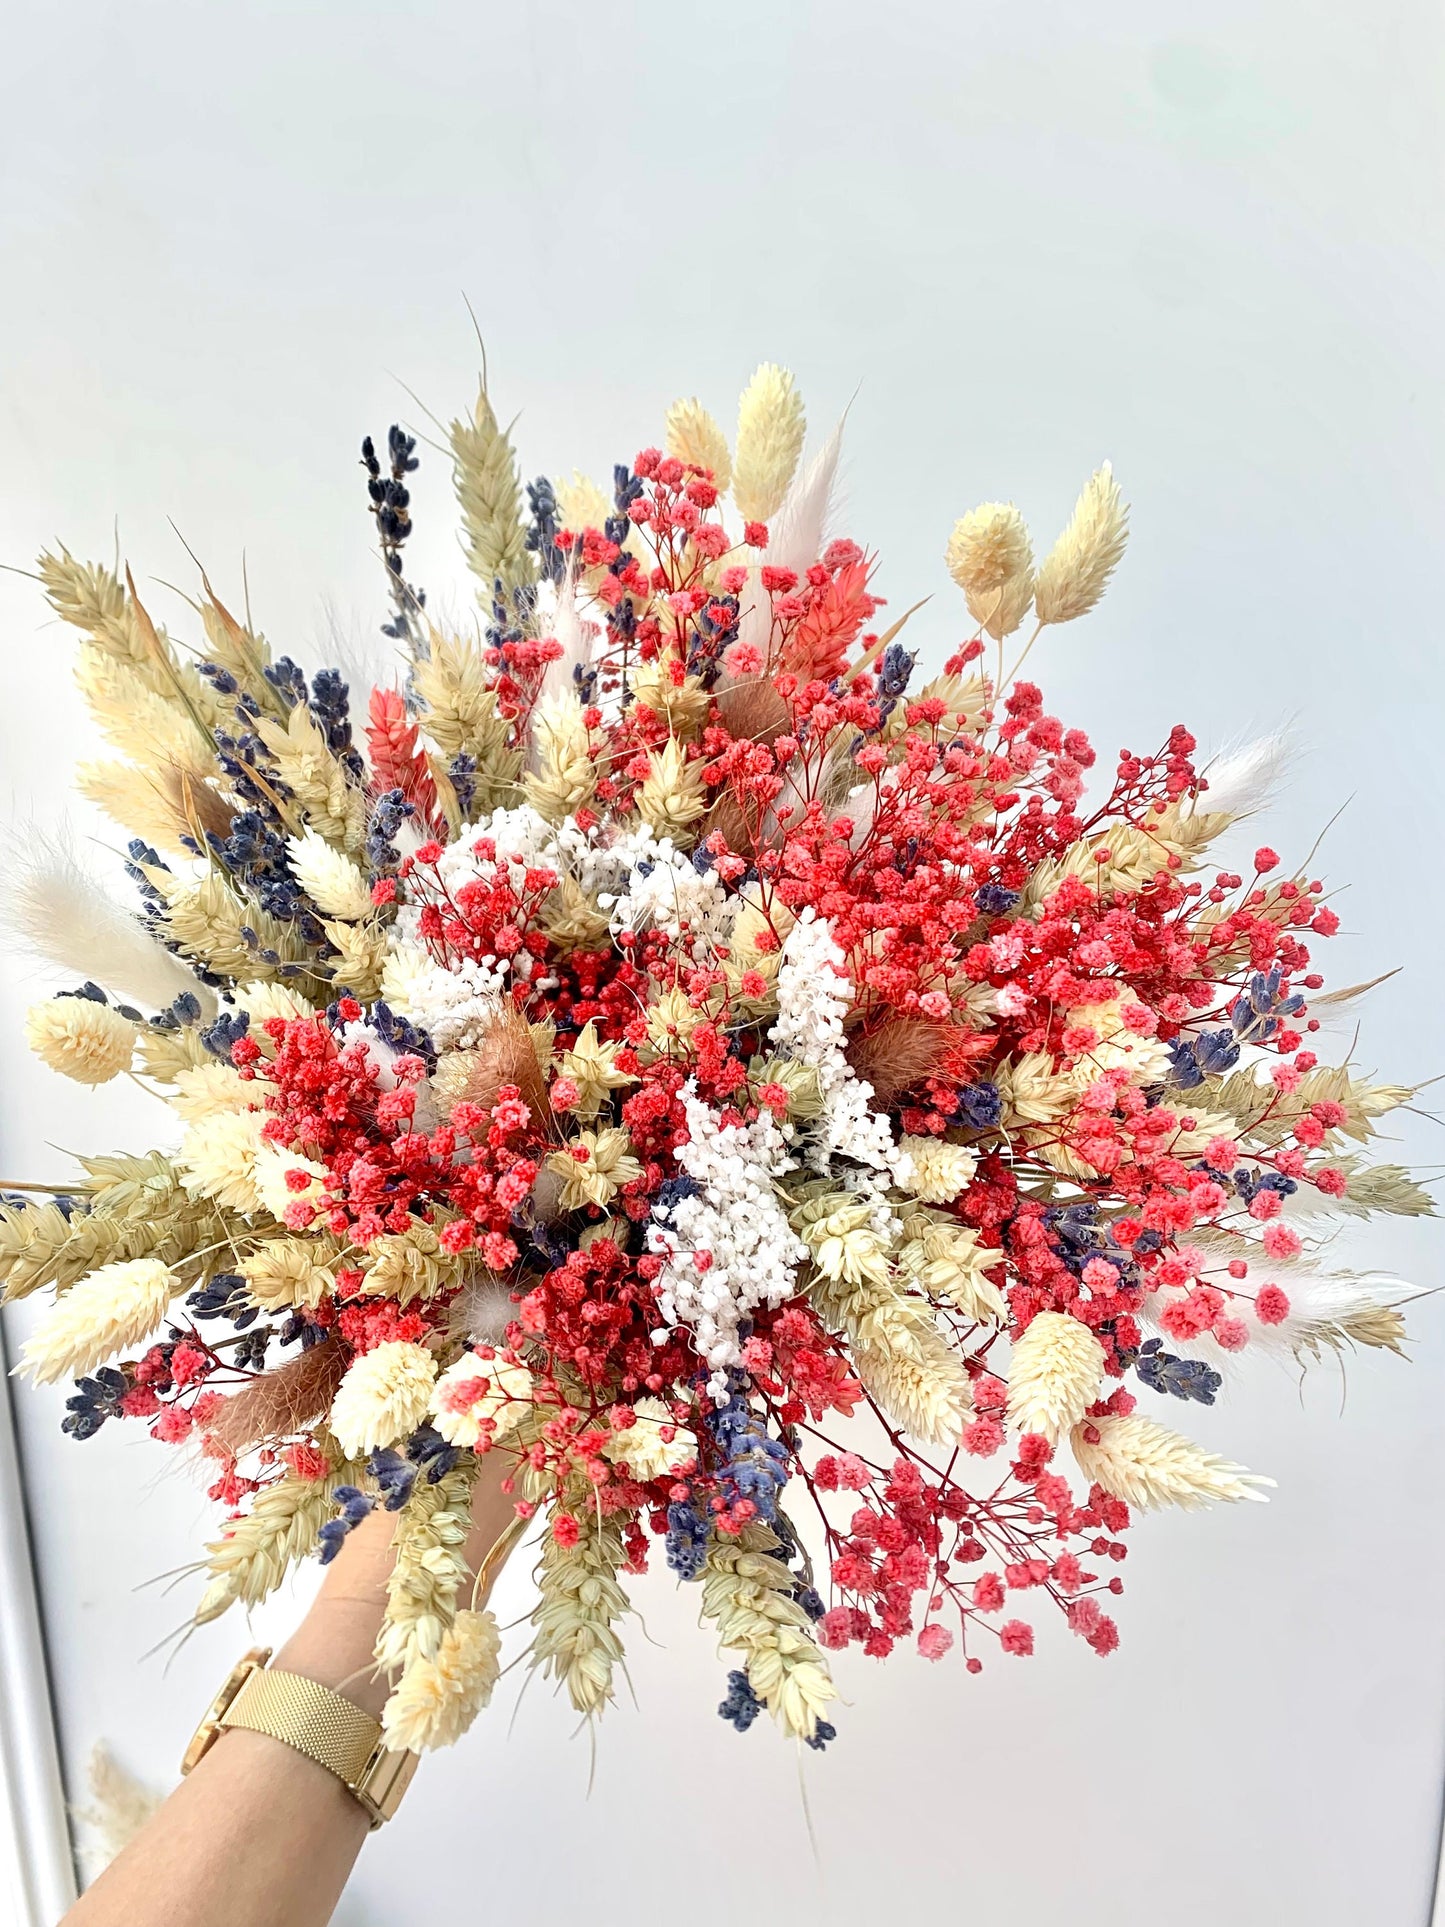 Scented BERRY Bouquet / Dried Flowers/ Dried Flower Bouquet/ Valentines Bouquet / Dried flower arrangement / Gift for her / Bridal bouquet